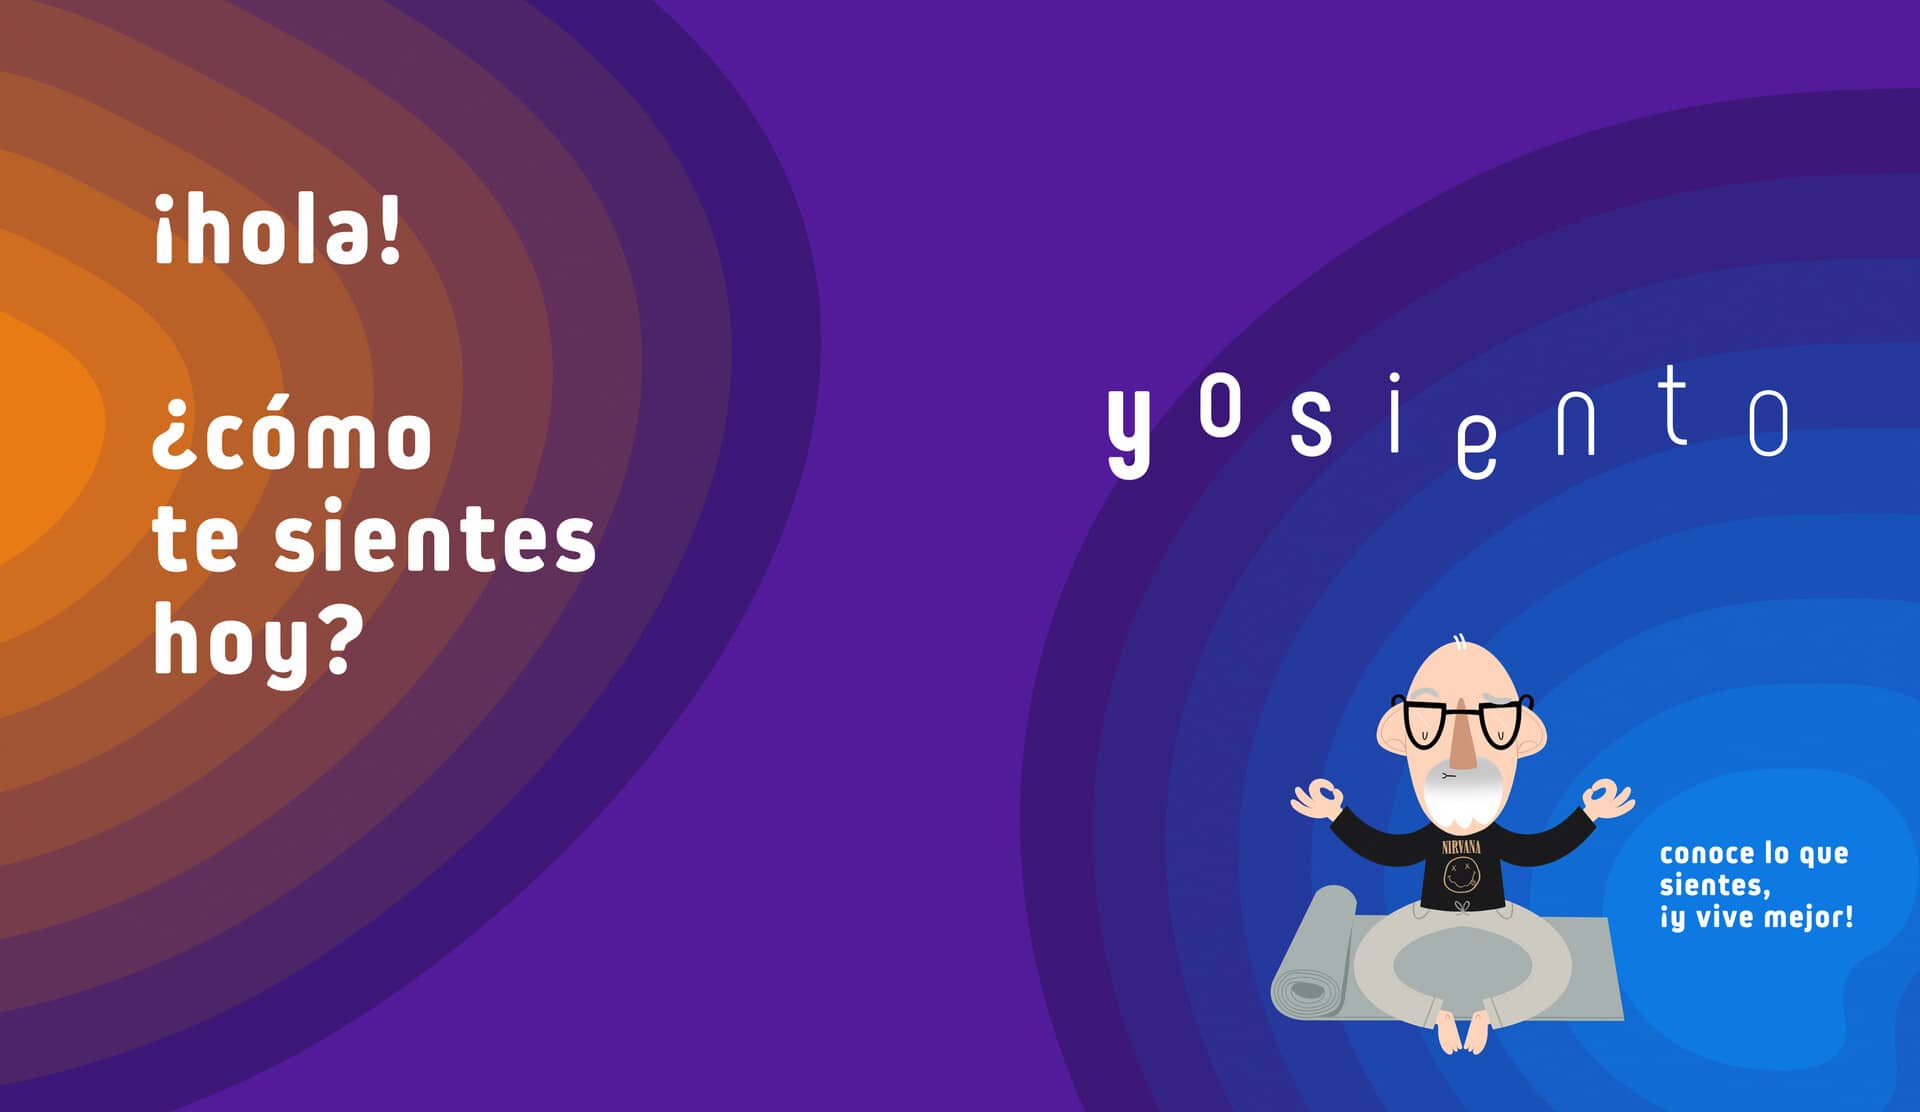 Yosiento layout with headlines, FEO character illustration and logo